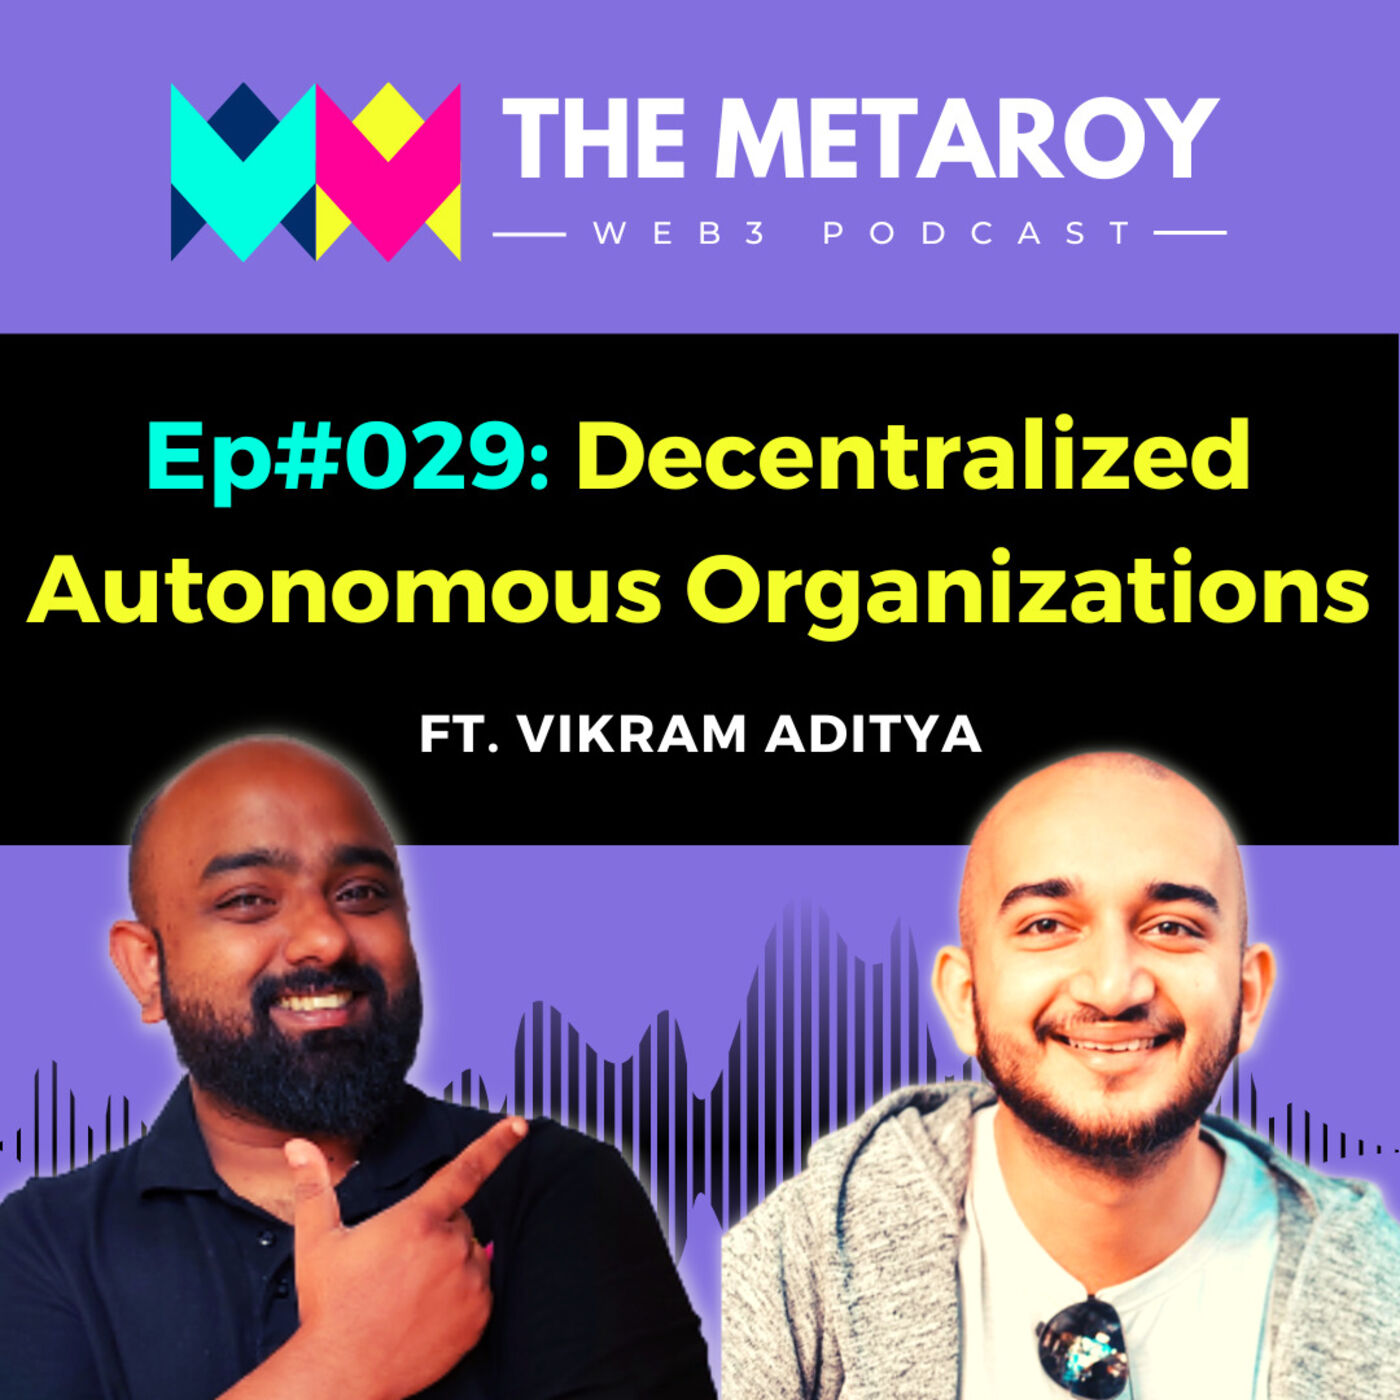 Vikram Aditya: Everything About DAOs, Explained Simply | Ep #029